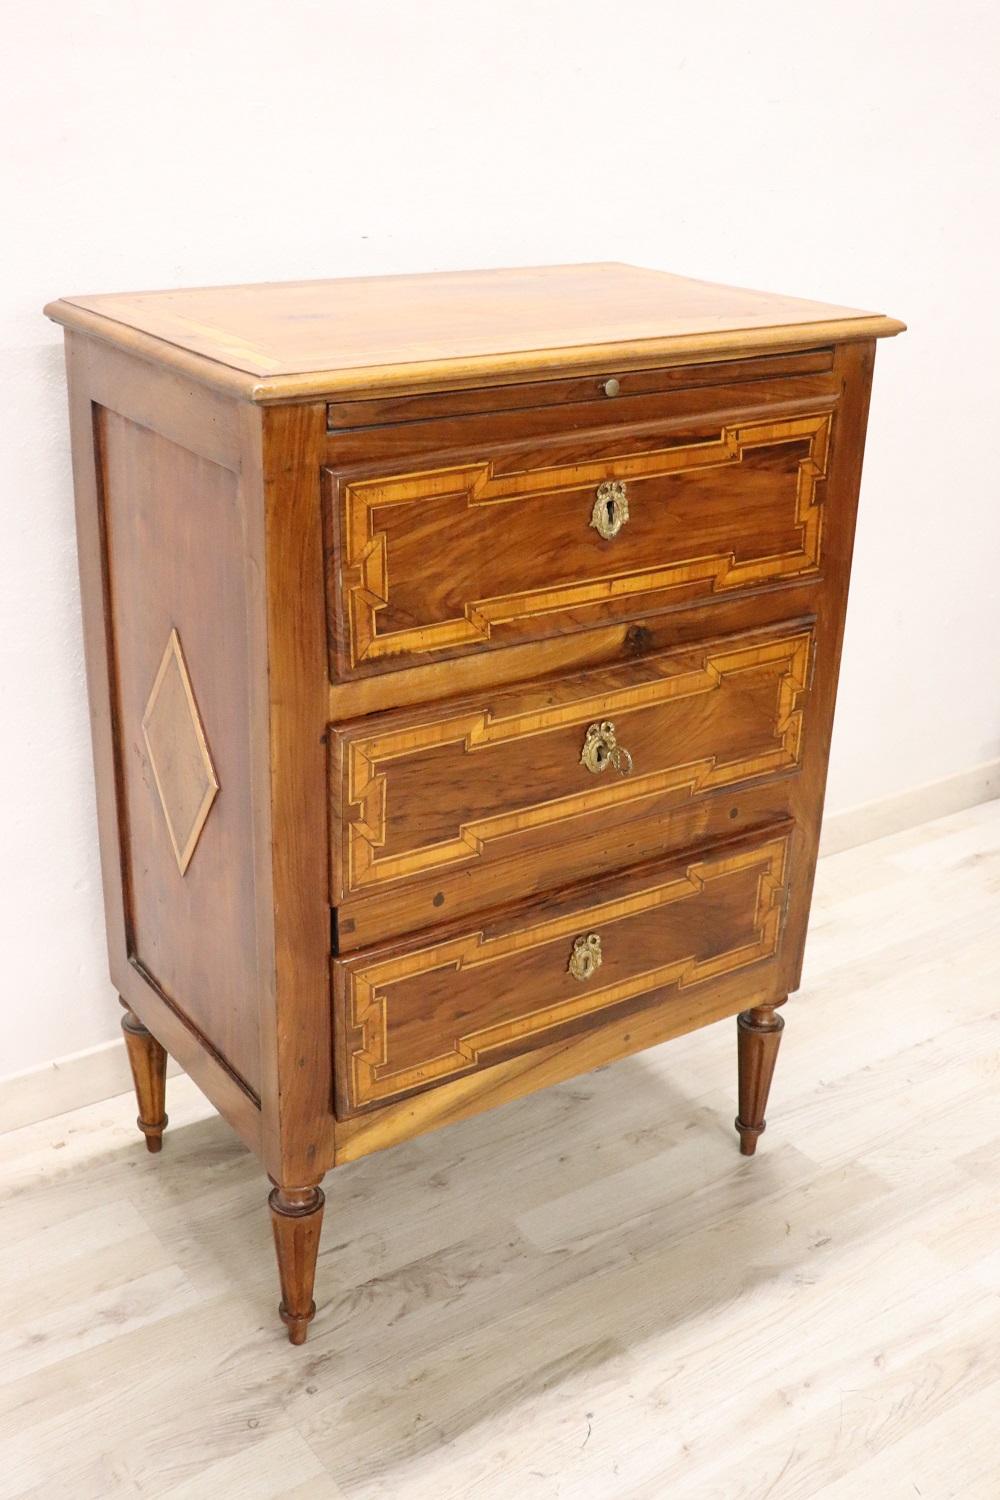 Inlay Early 19th Century Italian Louis XVI Style Inlaid Walnut Small Chest of Drawers For Sale